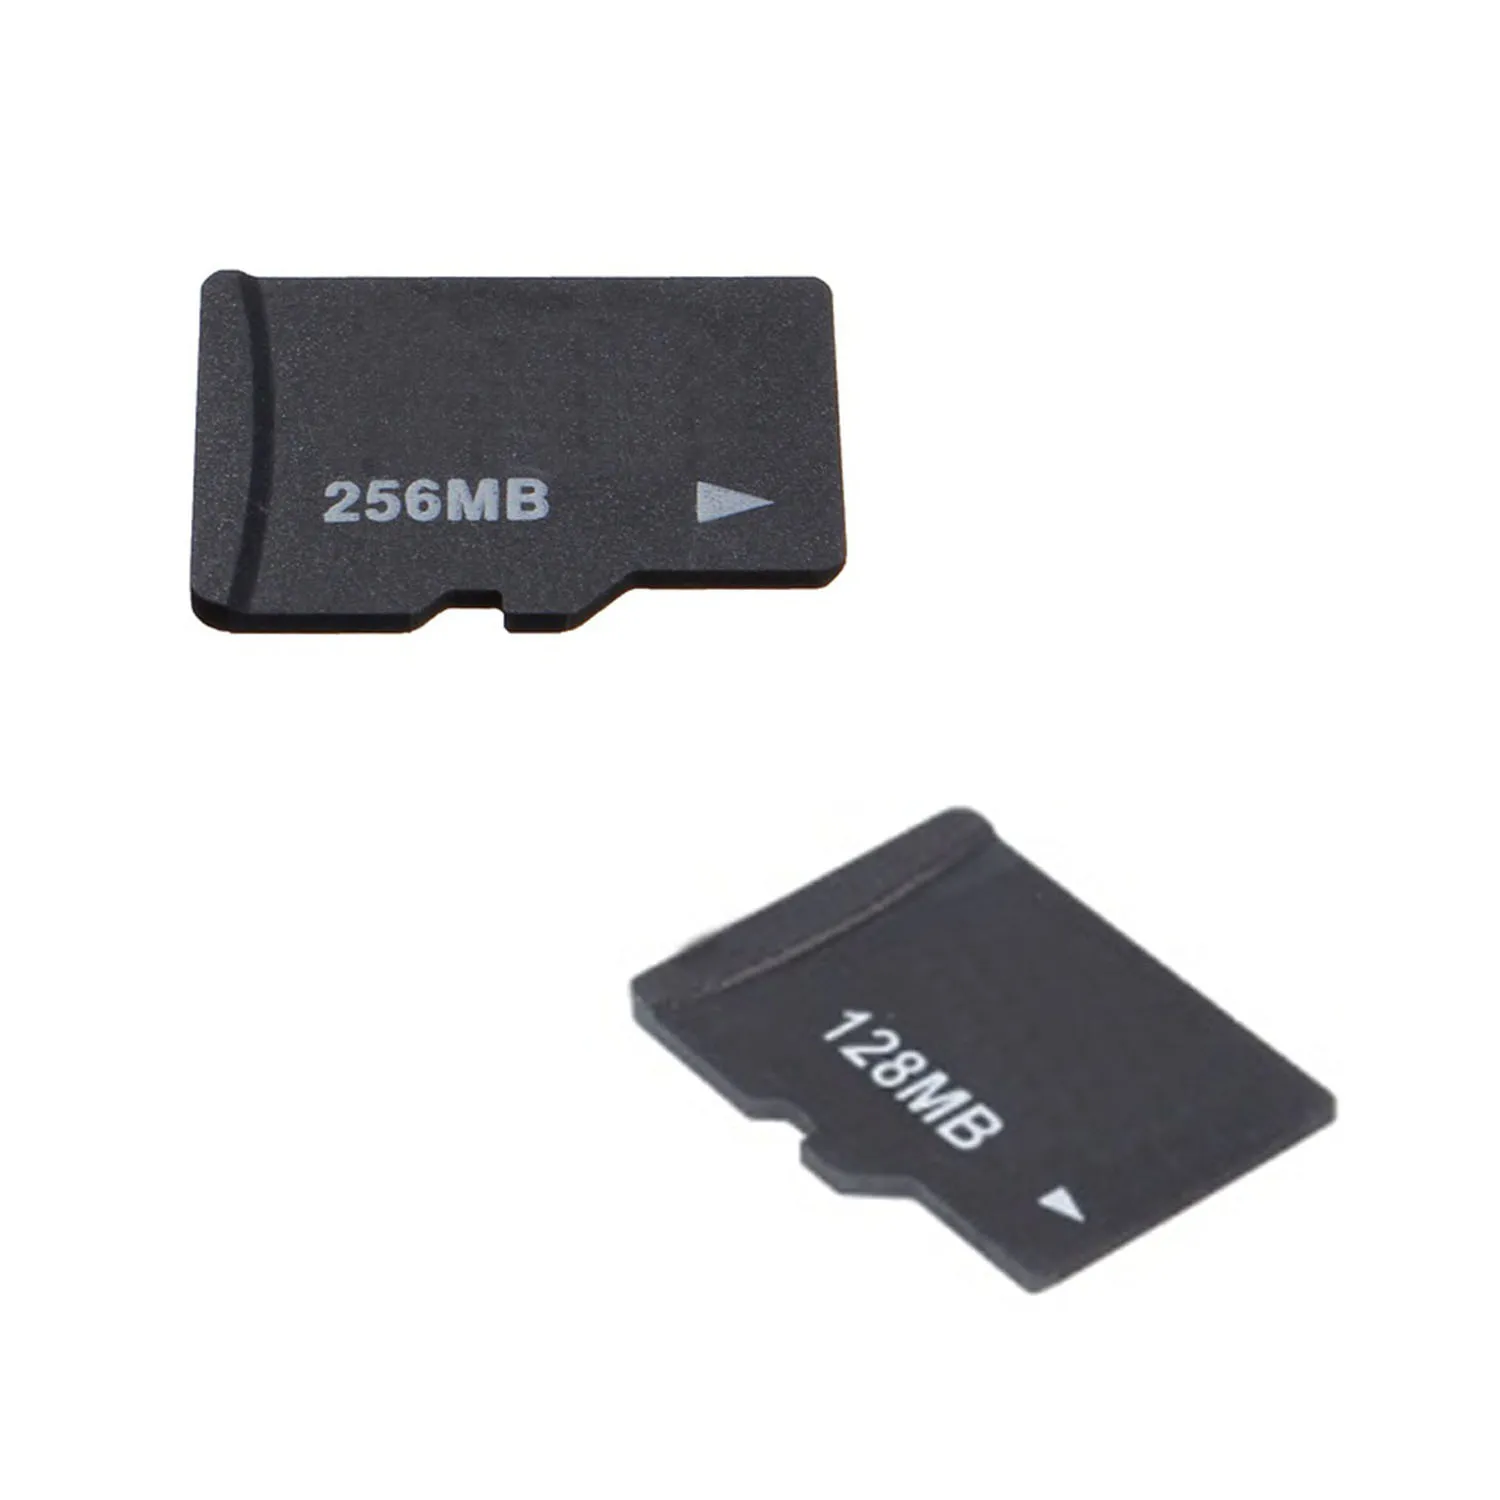 

TF Memory Card For Samsung Galaxy S5 S4 S3 Note 4 3 2 HTC Sony Nokia Cellphone